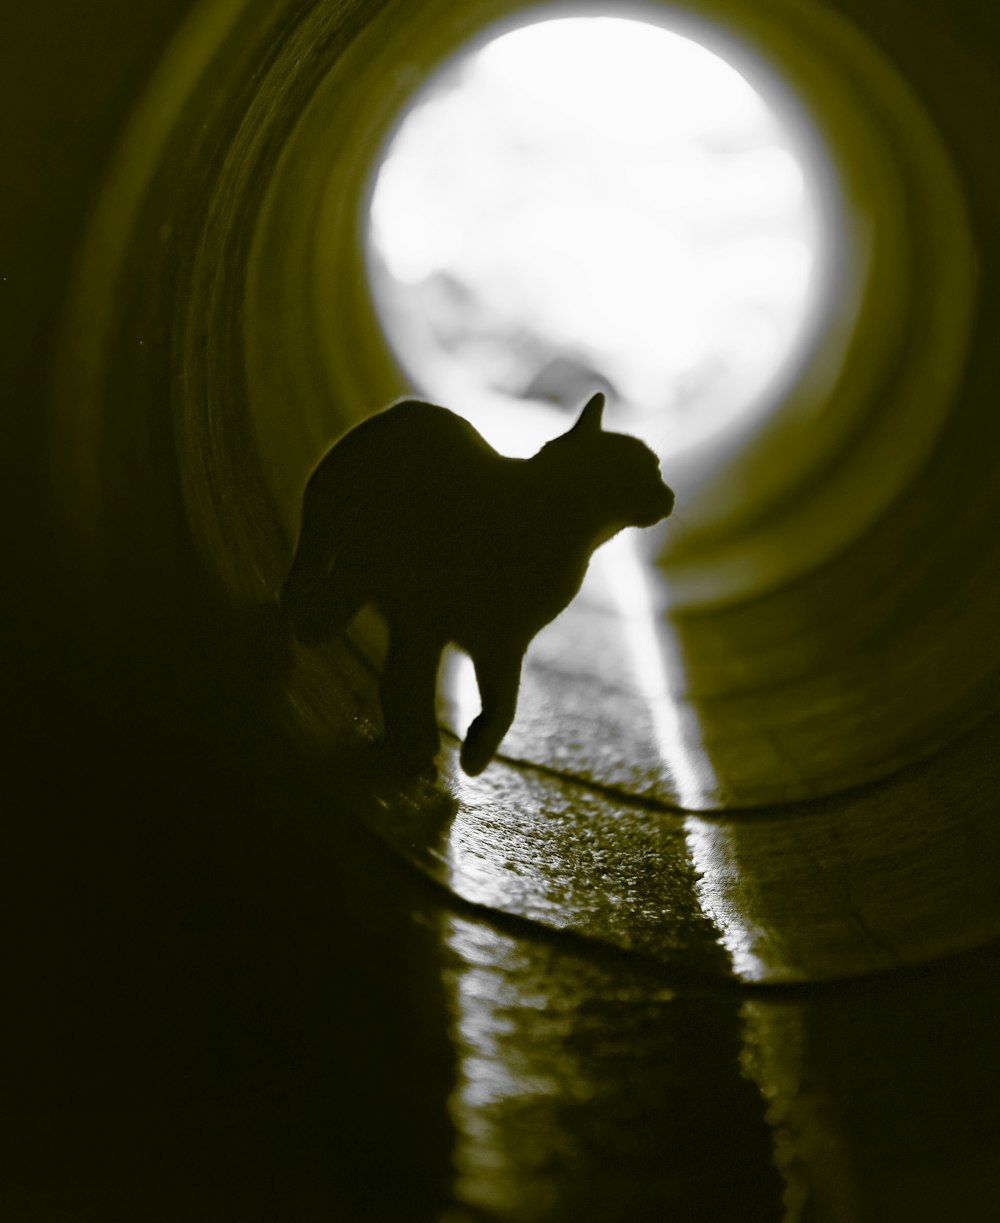 a cat is silhouetted against a dark tunnel